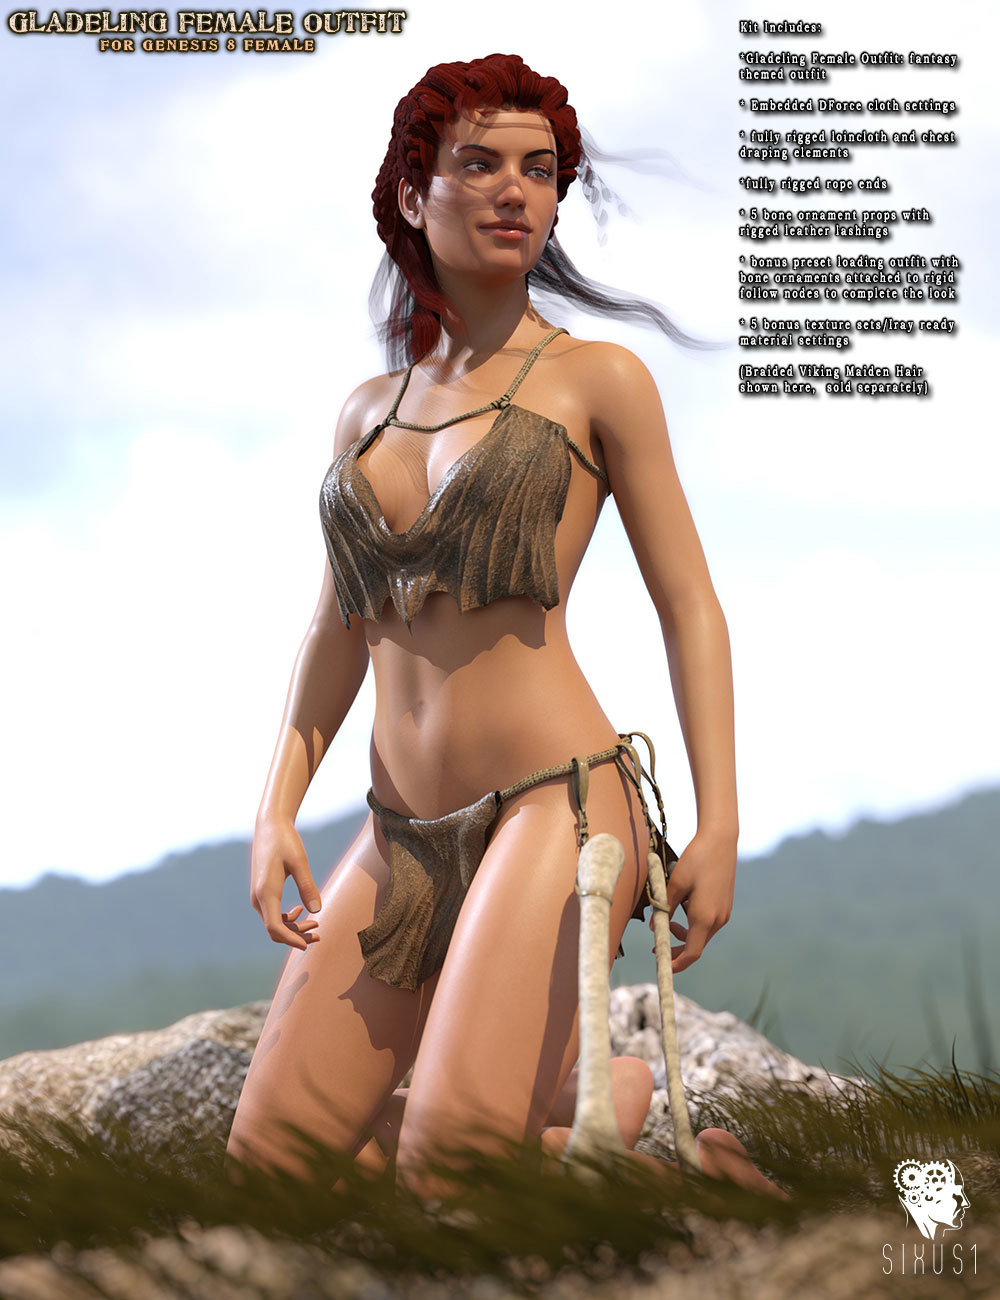 Gladeling Female Outfit for G8F_DAZ3D下载站